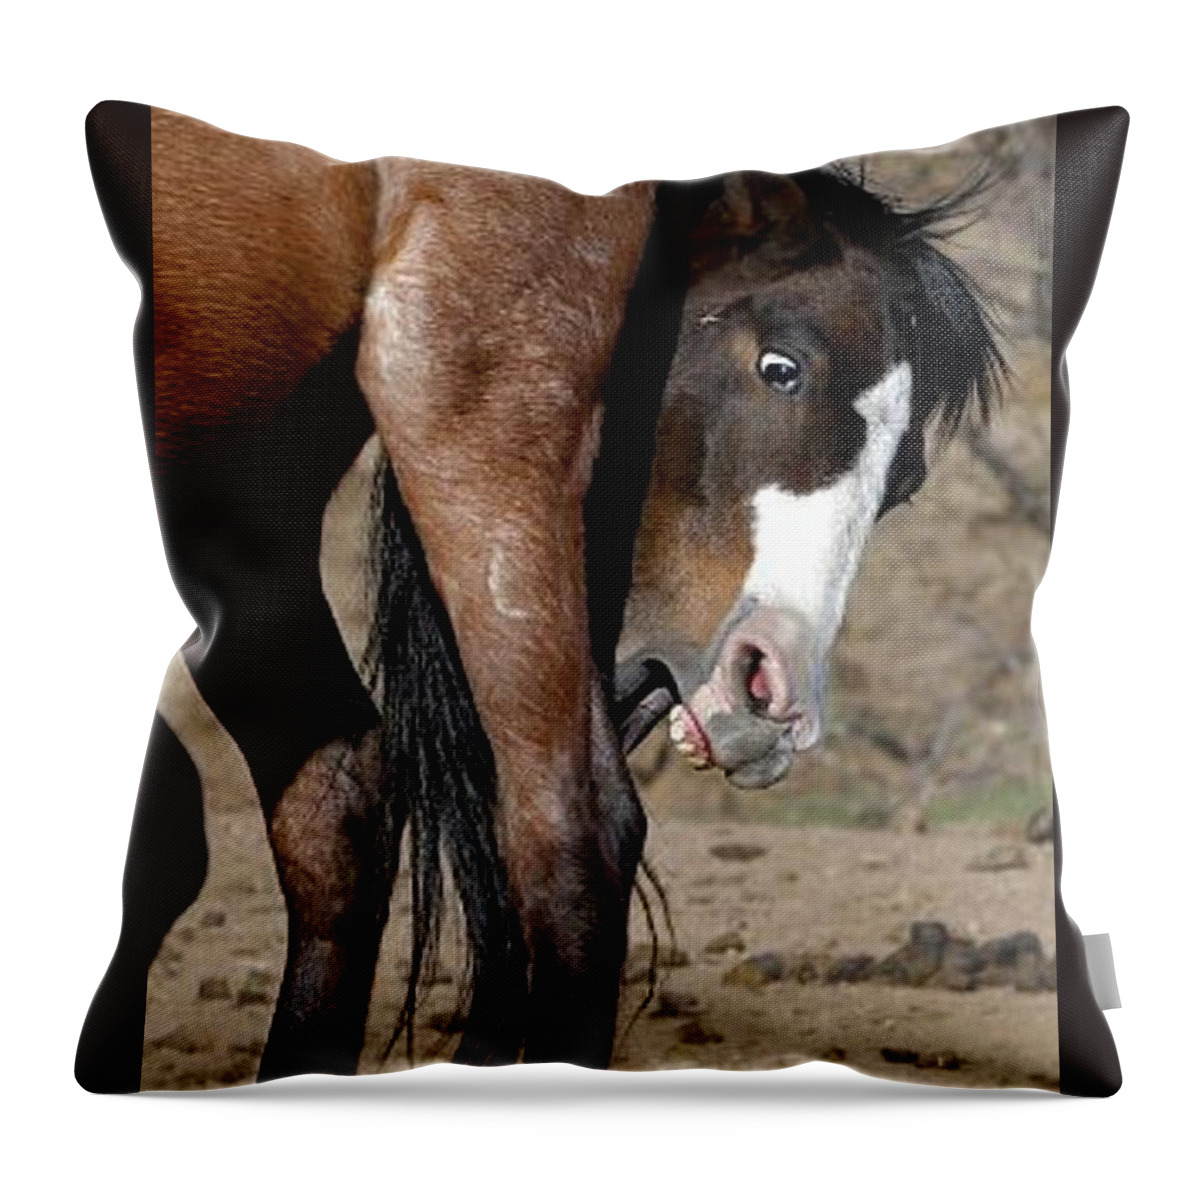 Salt River Wild Horses Throw Pillow featuring the digital art Bully by Tammy Keyes